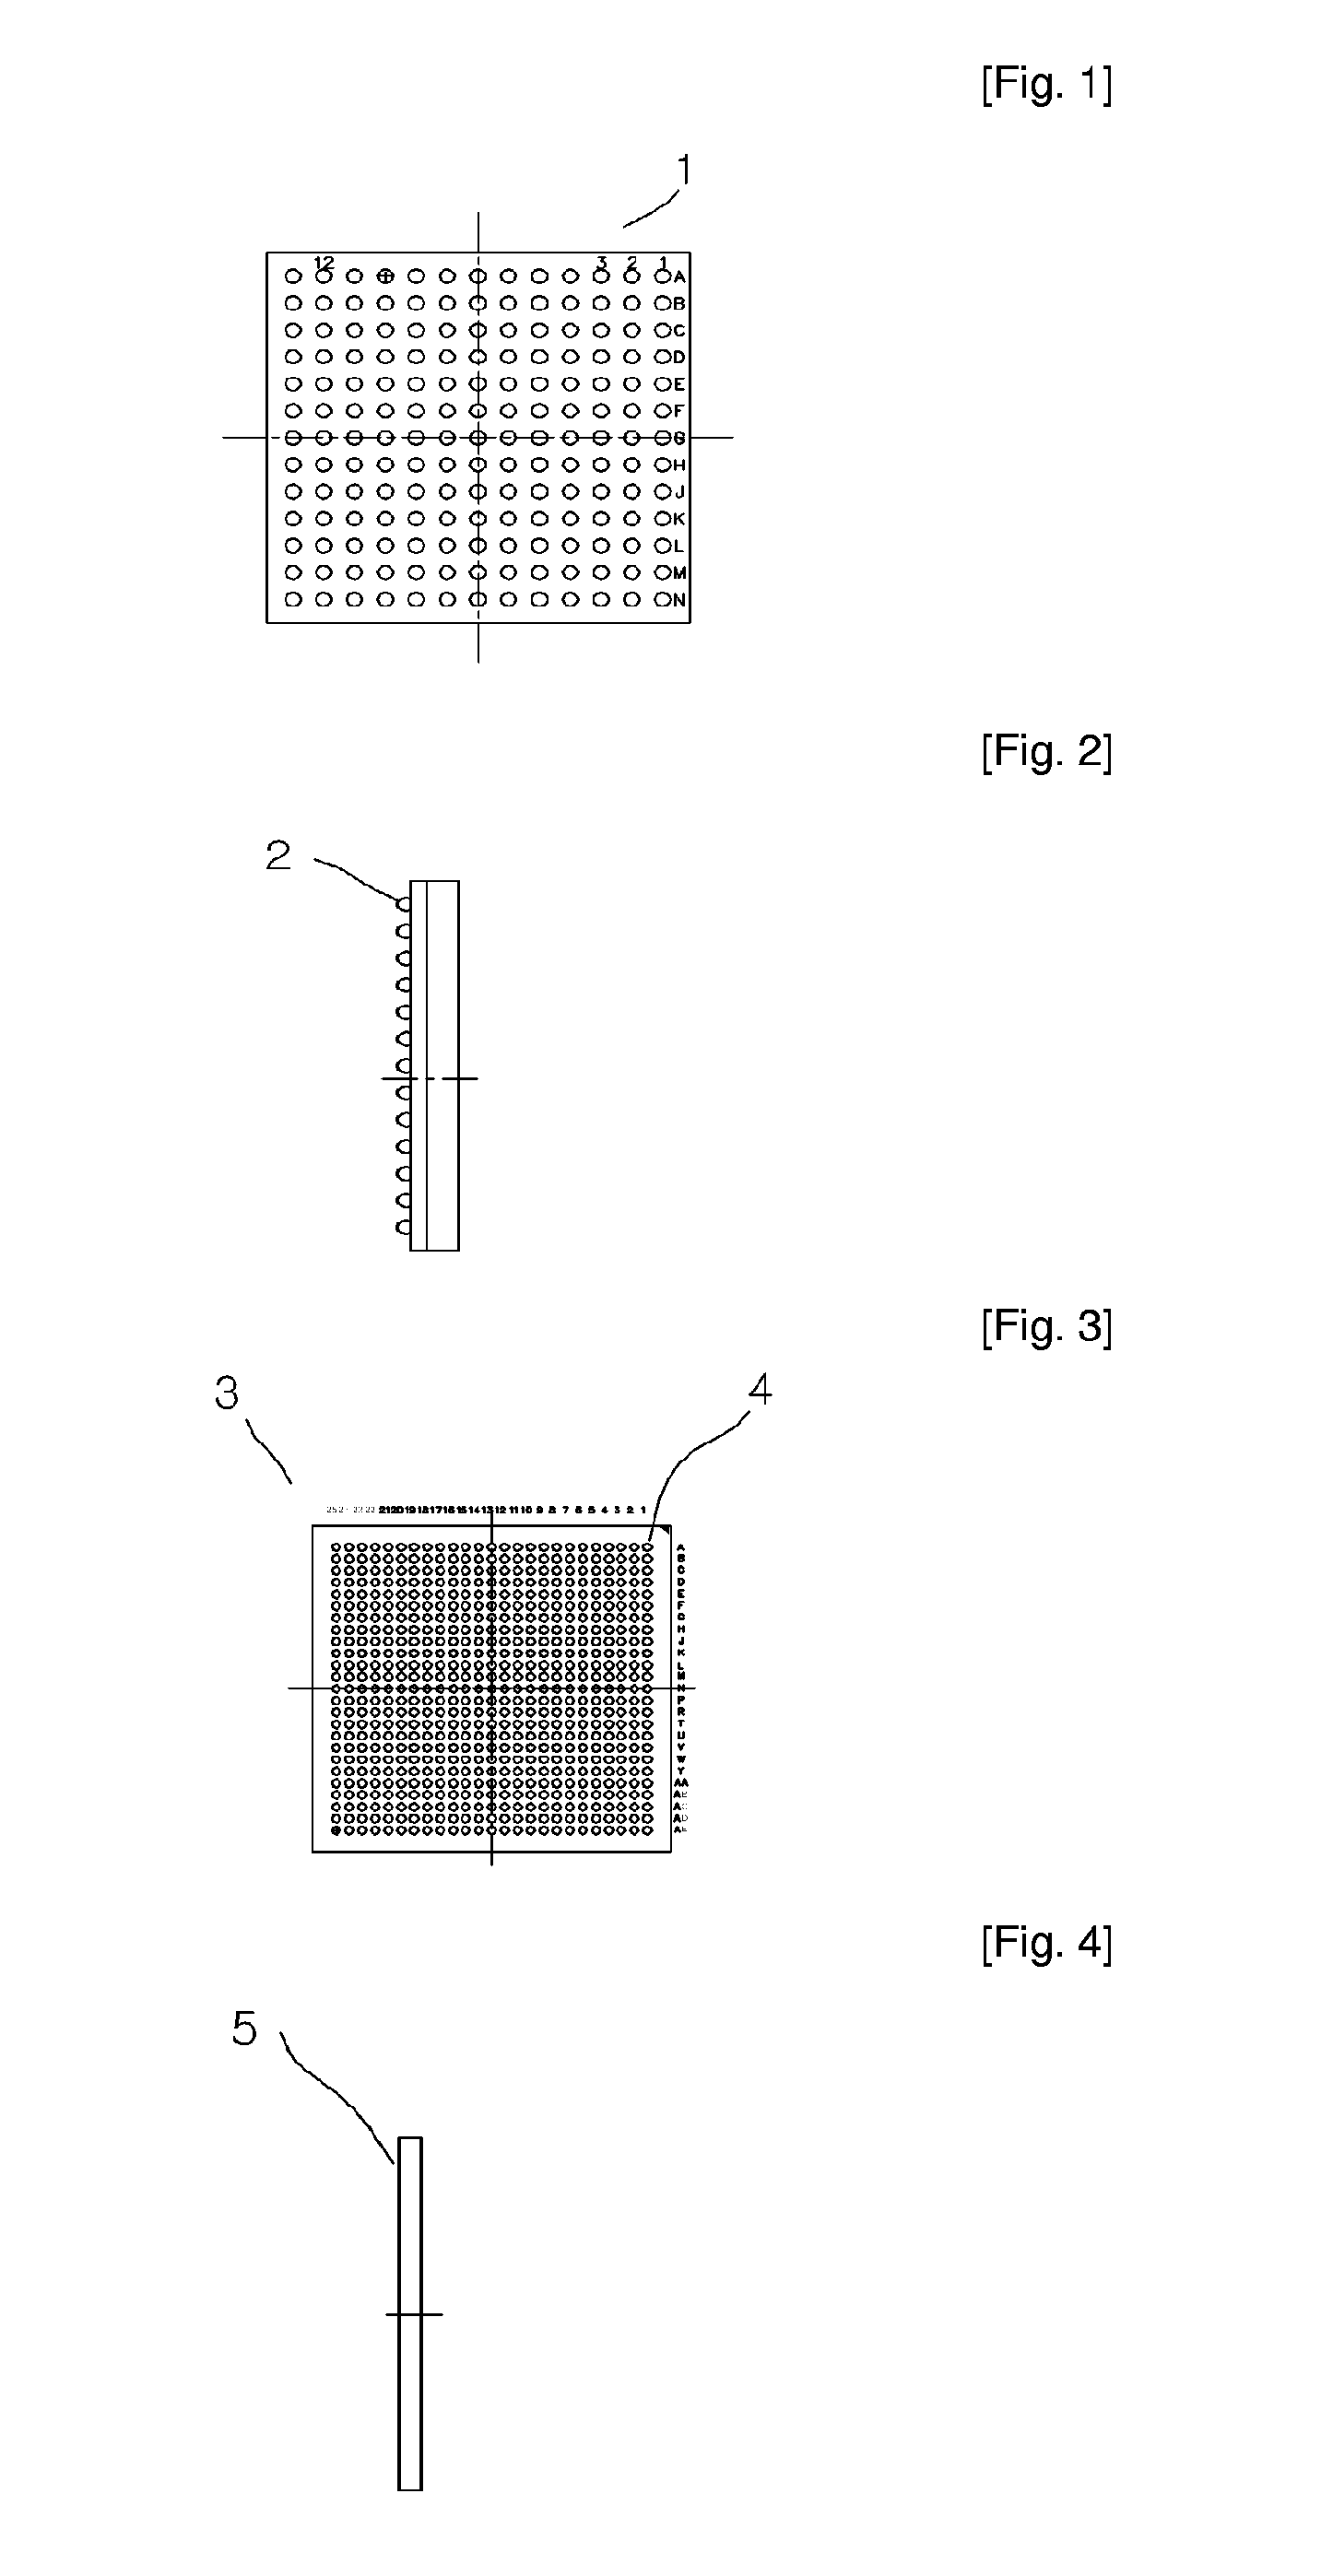 Test and burn-in socket for integrated circuits (ICS)